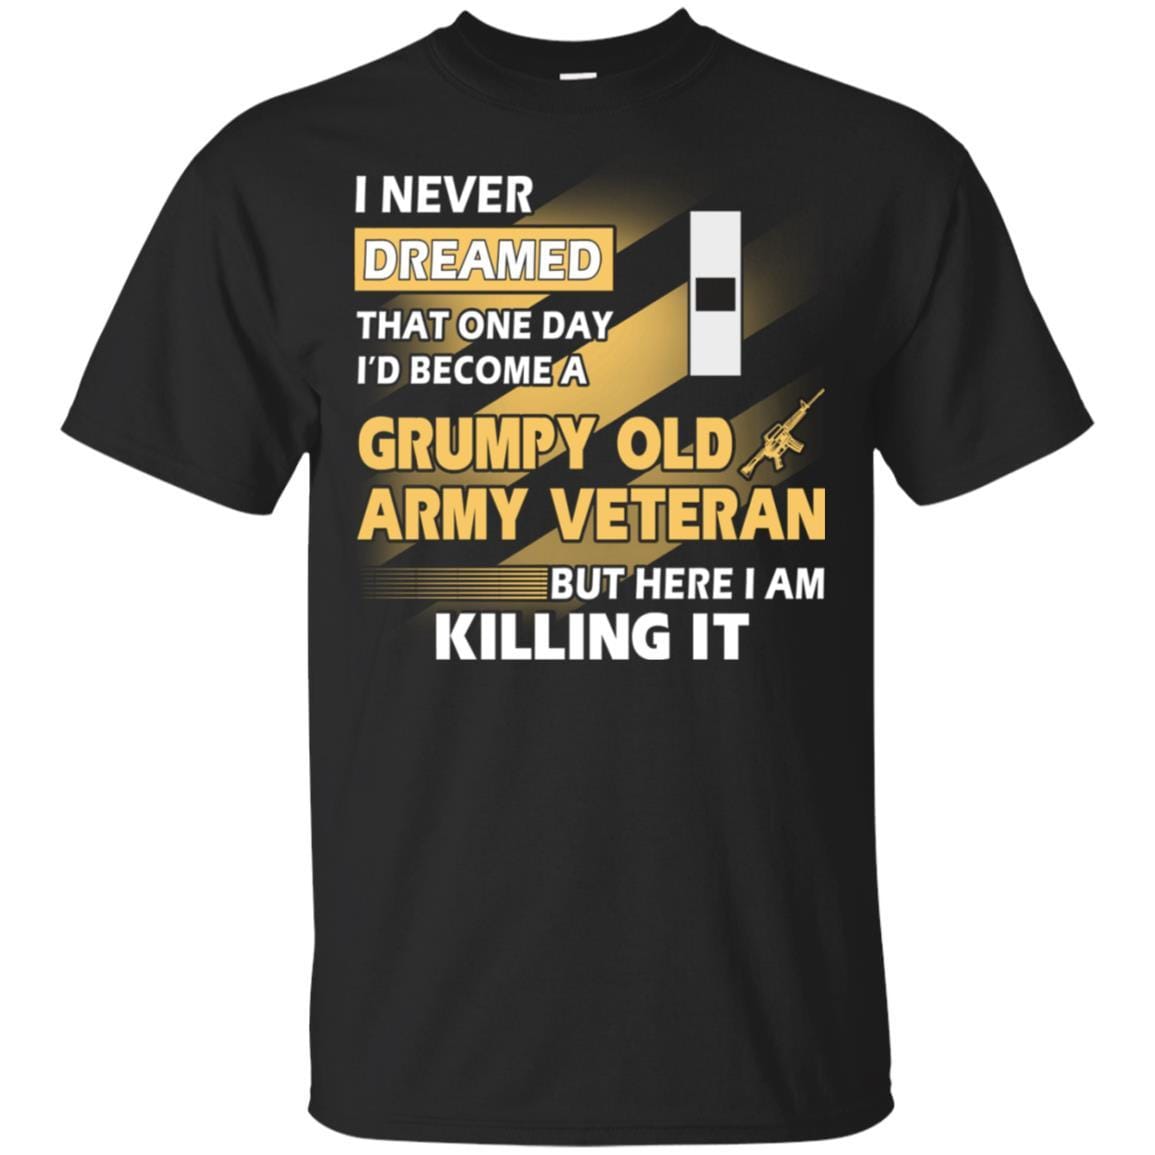 US Army T-Shirt "Grumpy Old Veteran" W-1 Warrant Officer 1(WO1) On Front-TShirt-Army-Veterans Nation